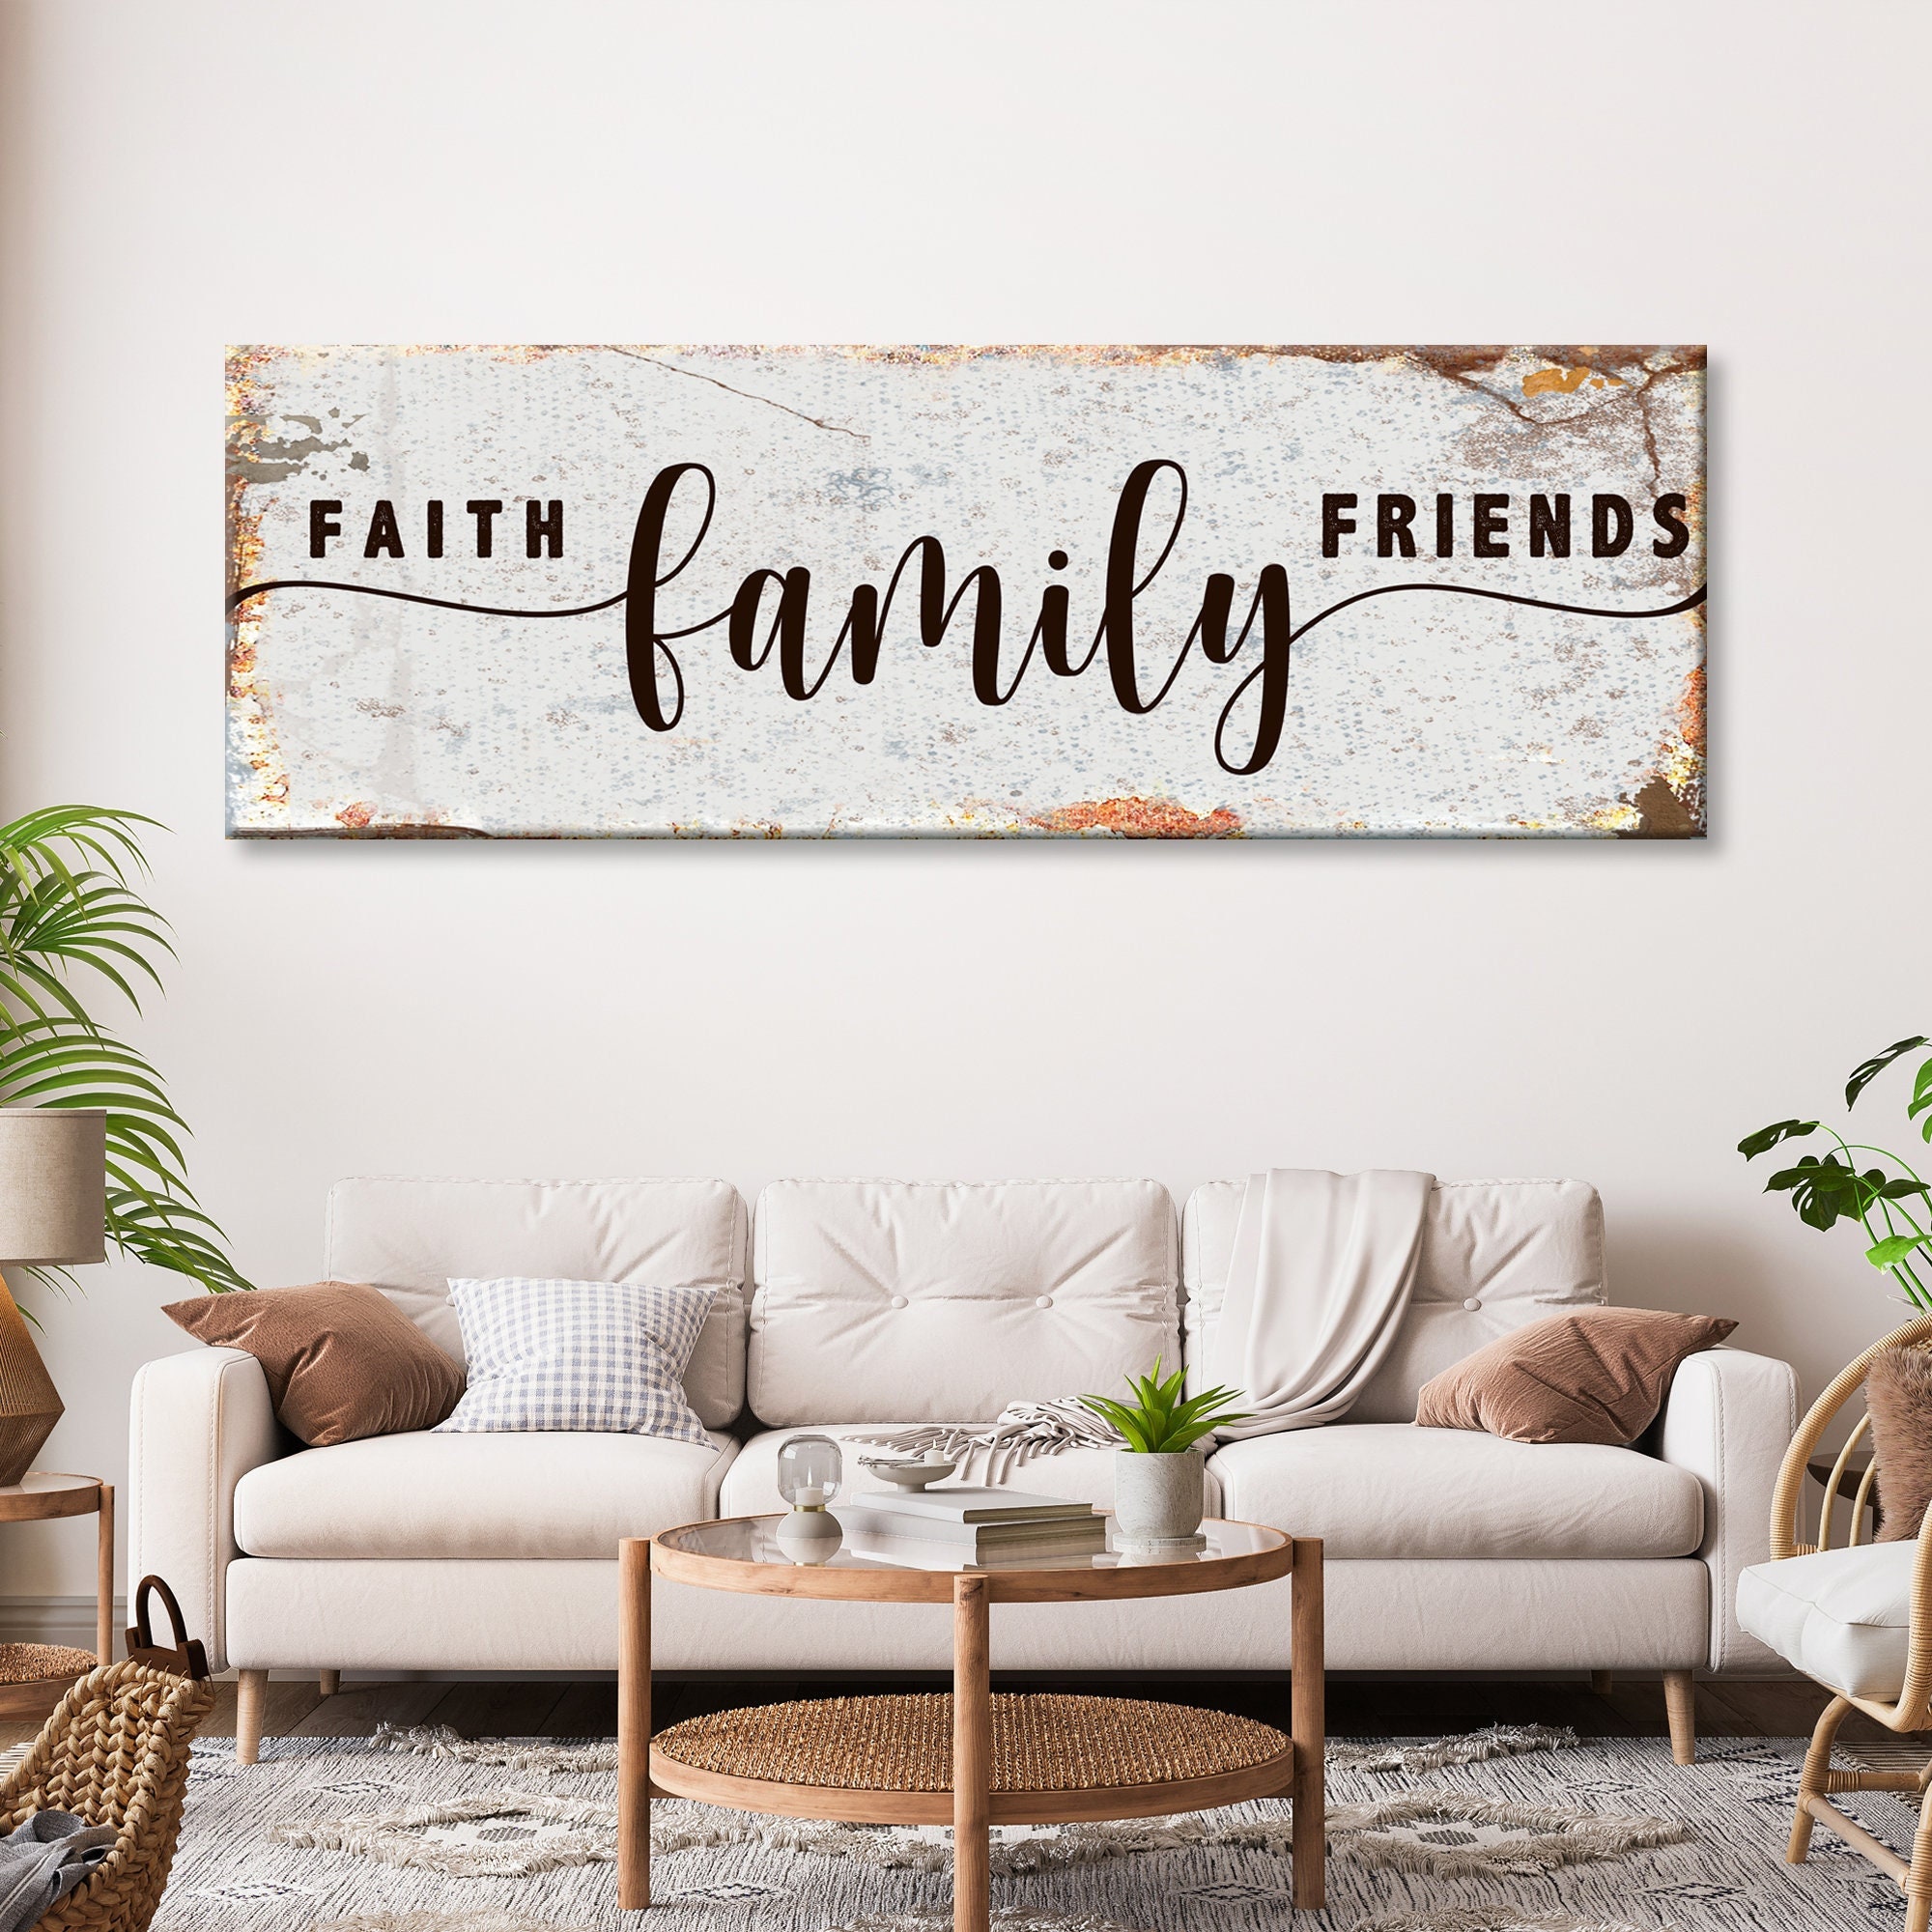 14 Faith-Based Gifts For Friends and Family - Her View From Home